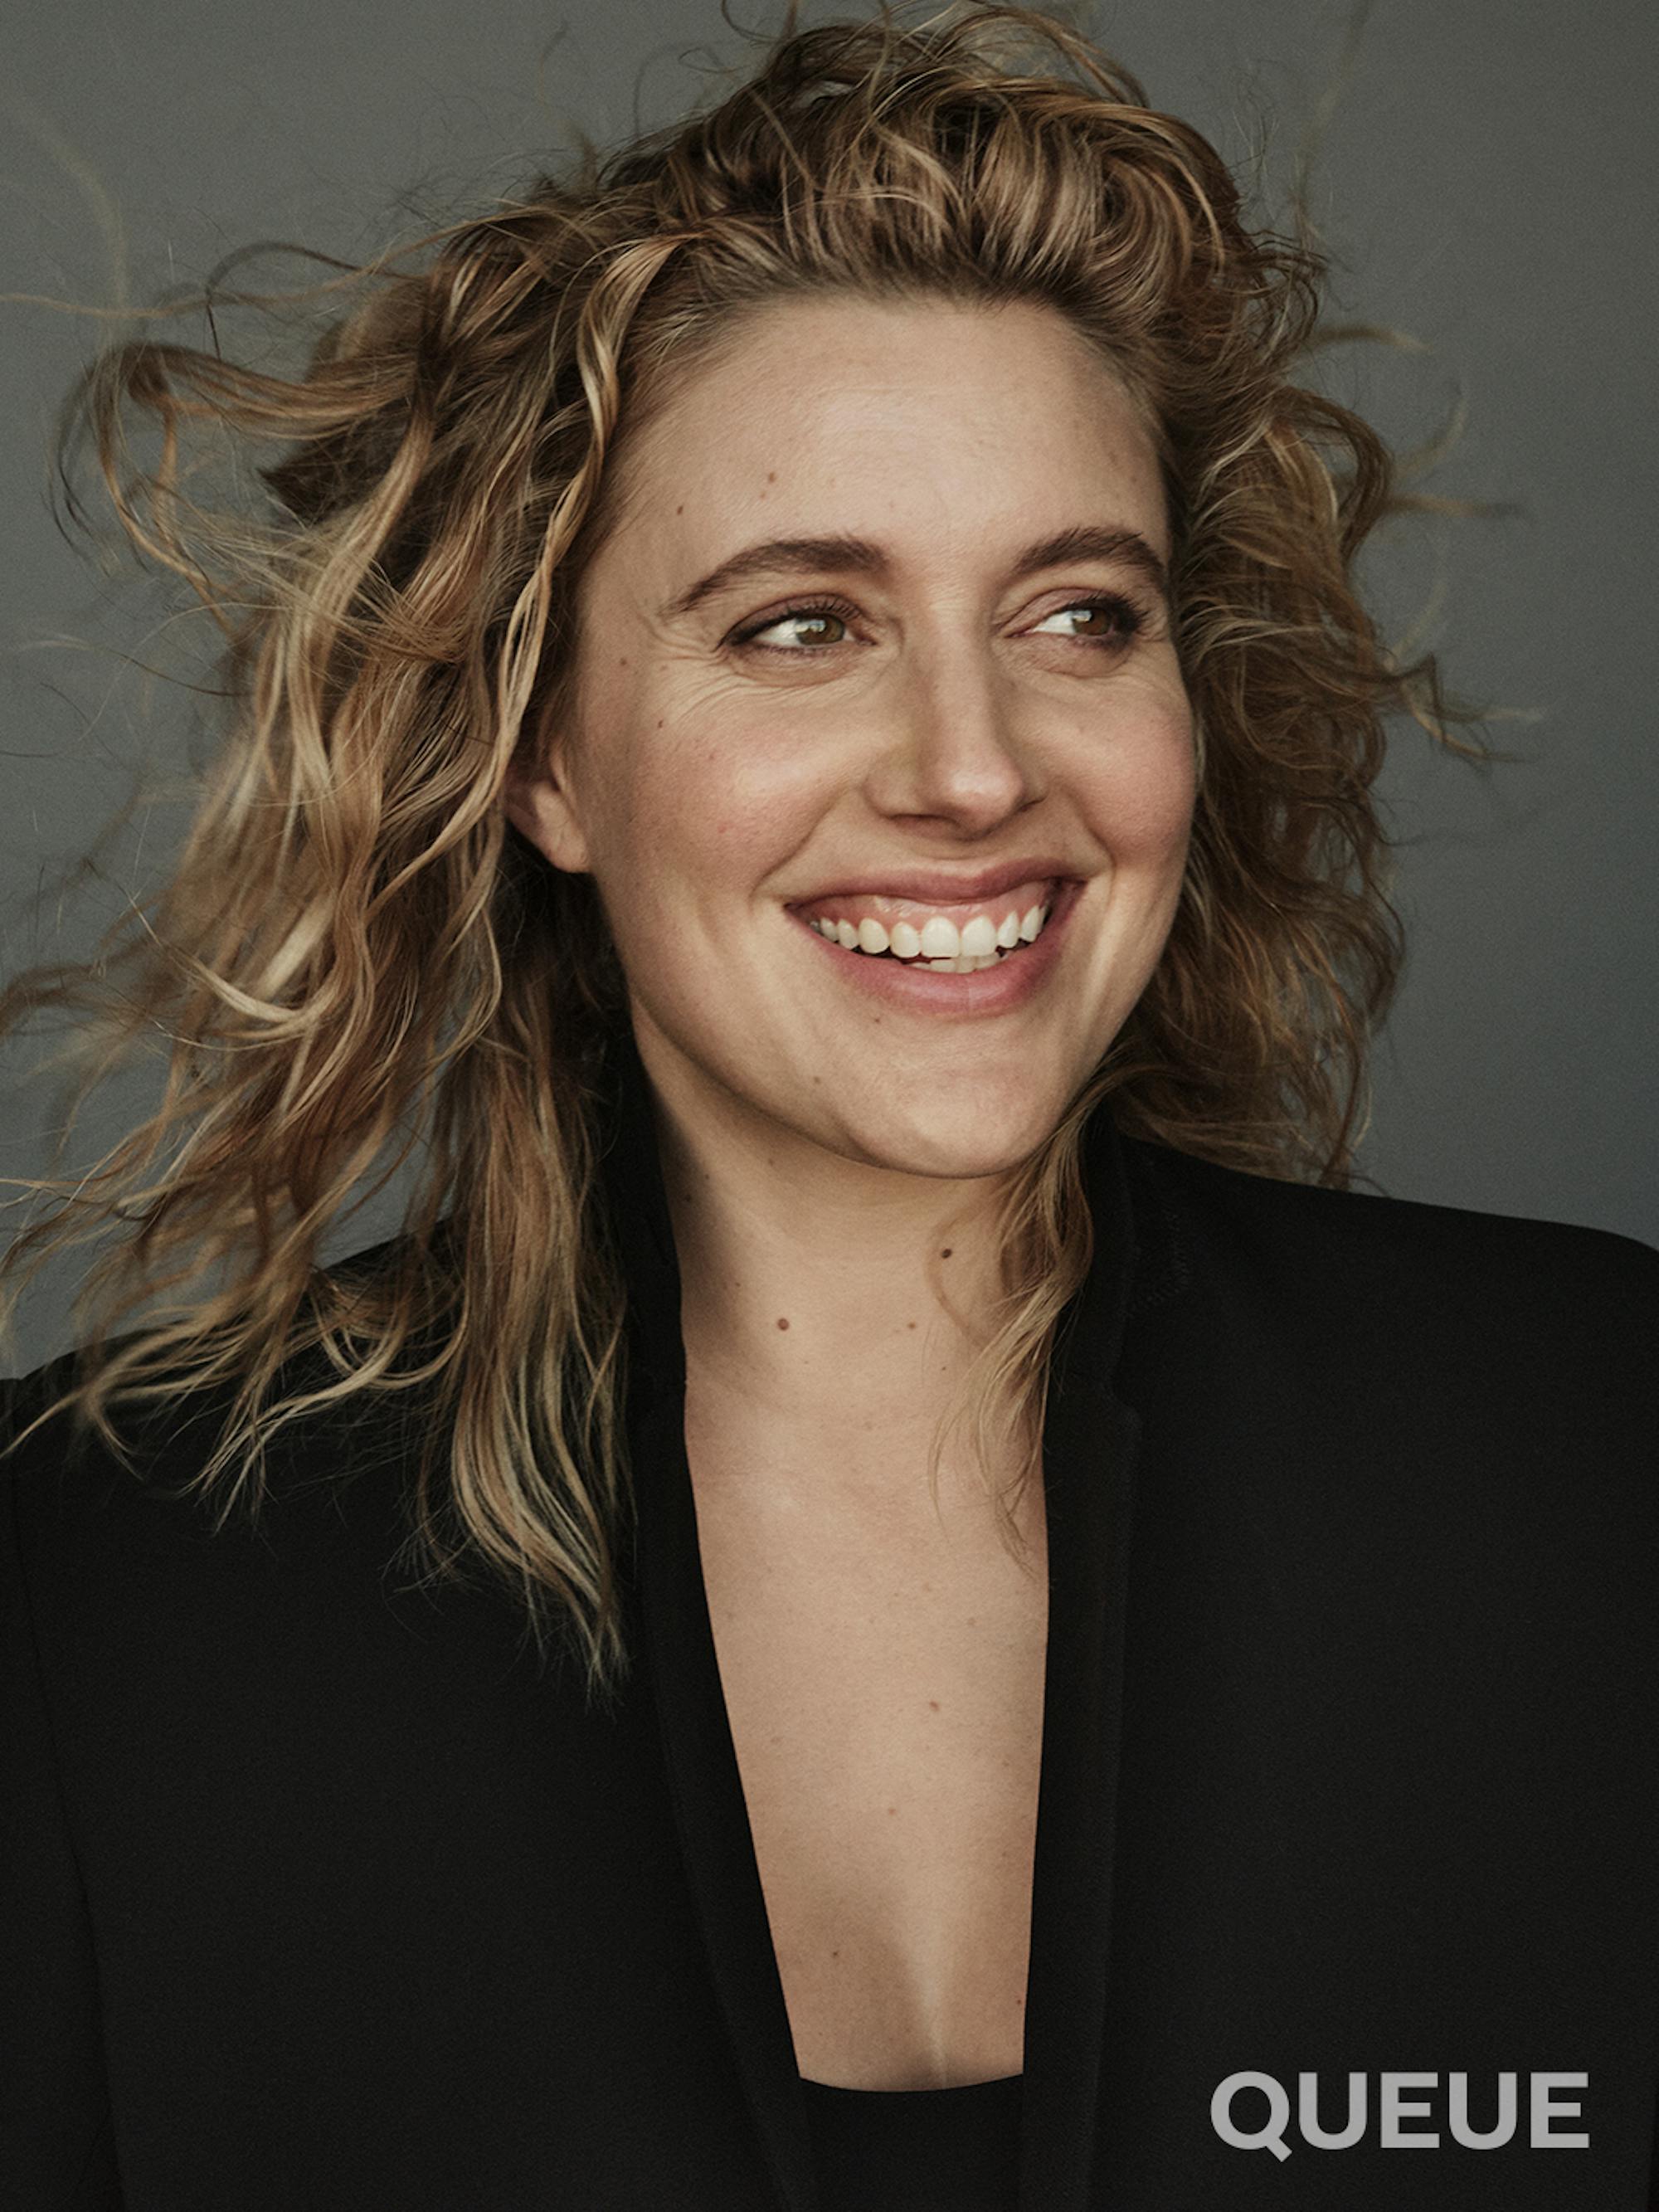 Greta Gerwig wears a black blazer and top and smiles at something offscreen.